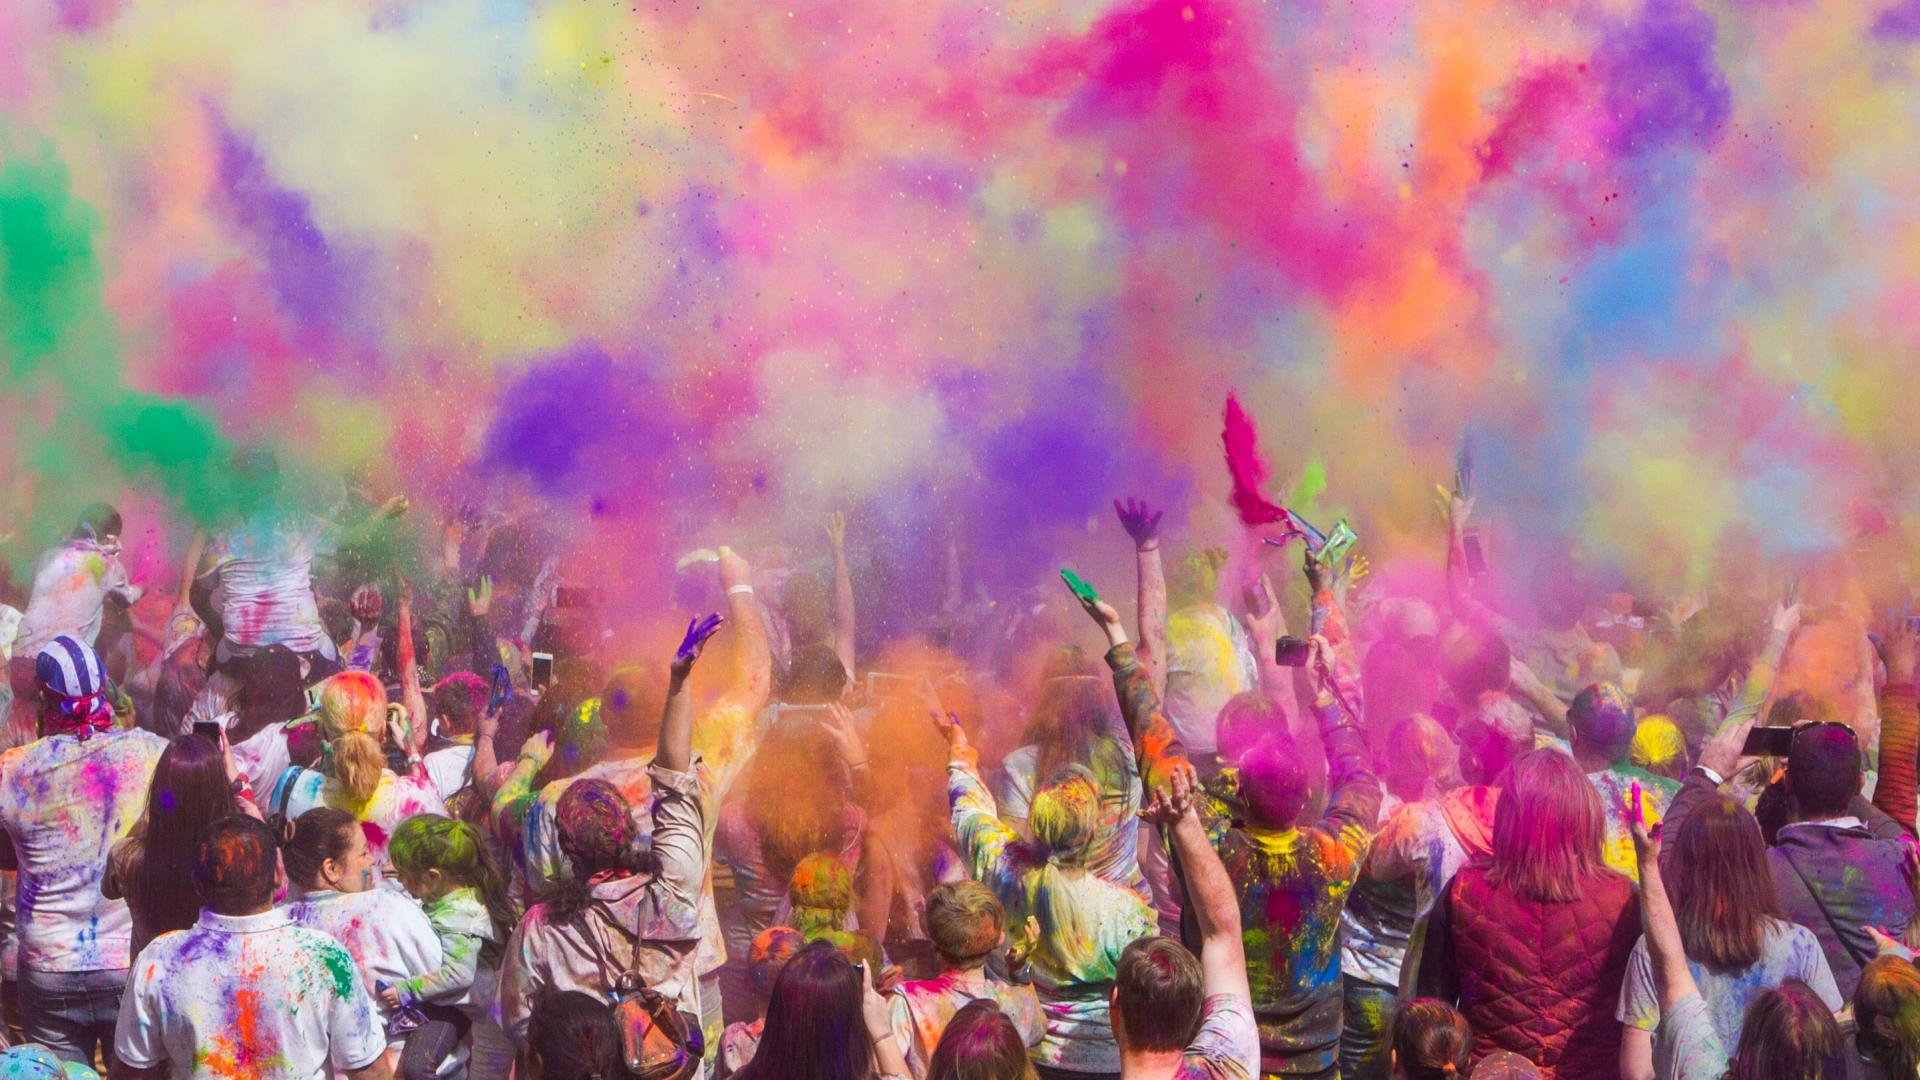 Coloured powders fill the air at the Holi festival